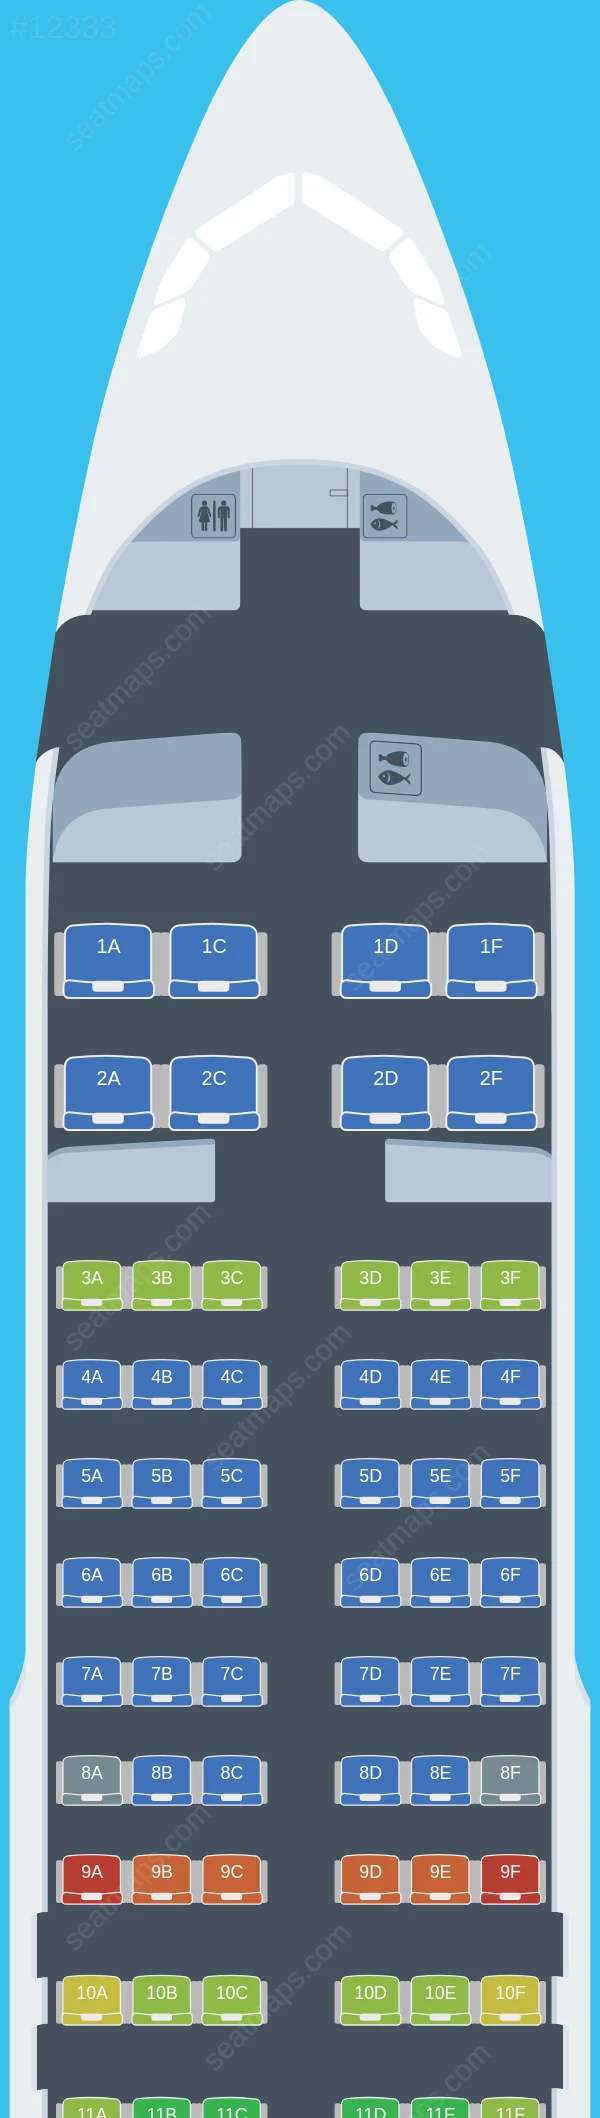 Cambodia Airways Airbus A320-200 V.2 seatmap preview